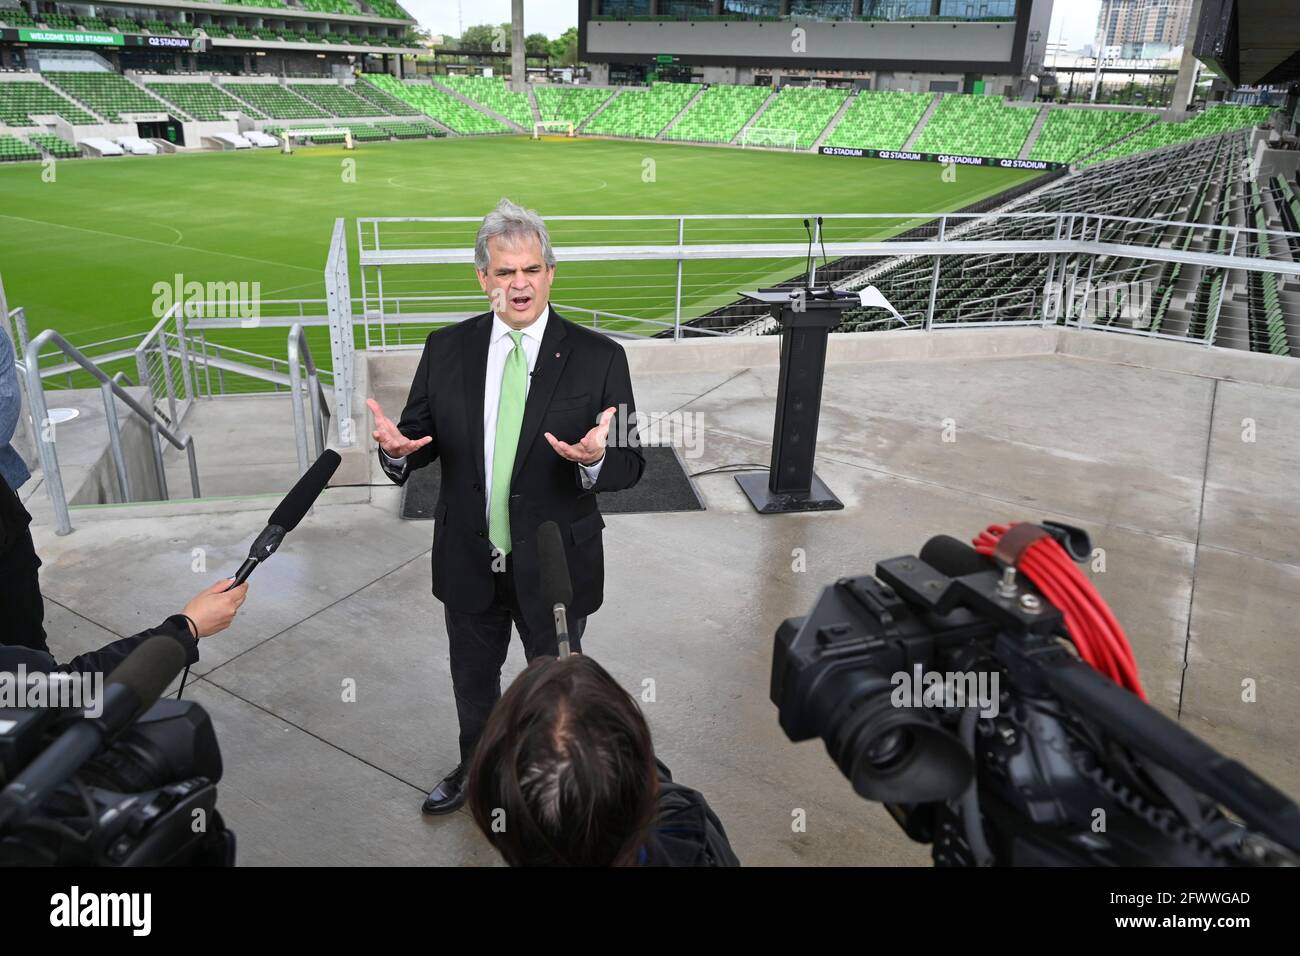 Austin Texas USA, May 24 2021: During a press conference, Austin FC officials and Mayor STEVE ADLER announce that declining pandemic numbers will allow 100% stadium capacity for Austin's Major League Soccer opening game next month. The stadium will host the U.S. Soccer Women's National Team in a friendly with Nigeria on June 16th, 2021. Credit: Bob Daemmrich/Alamy Live News Stock Photo